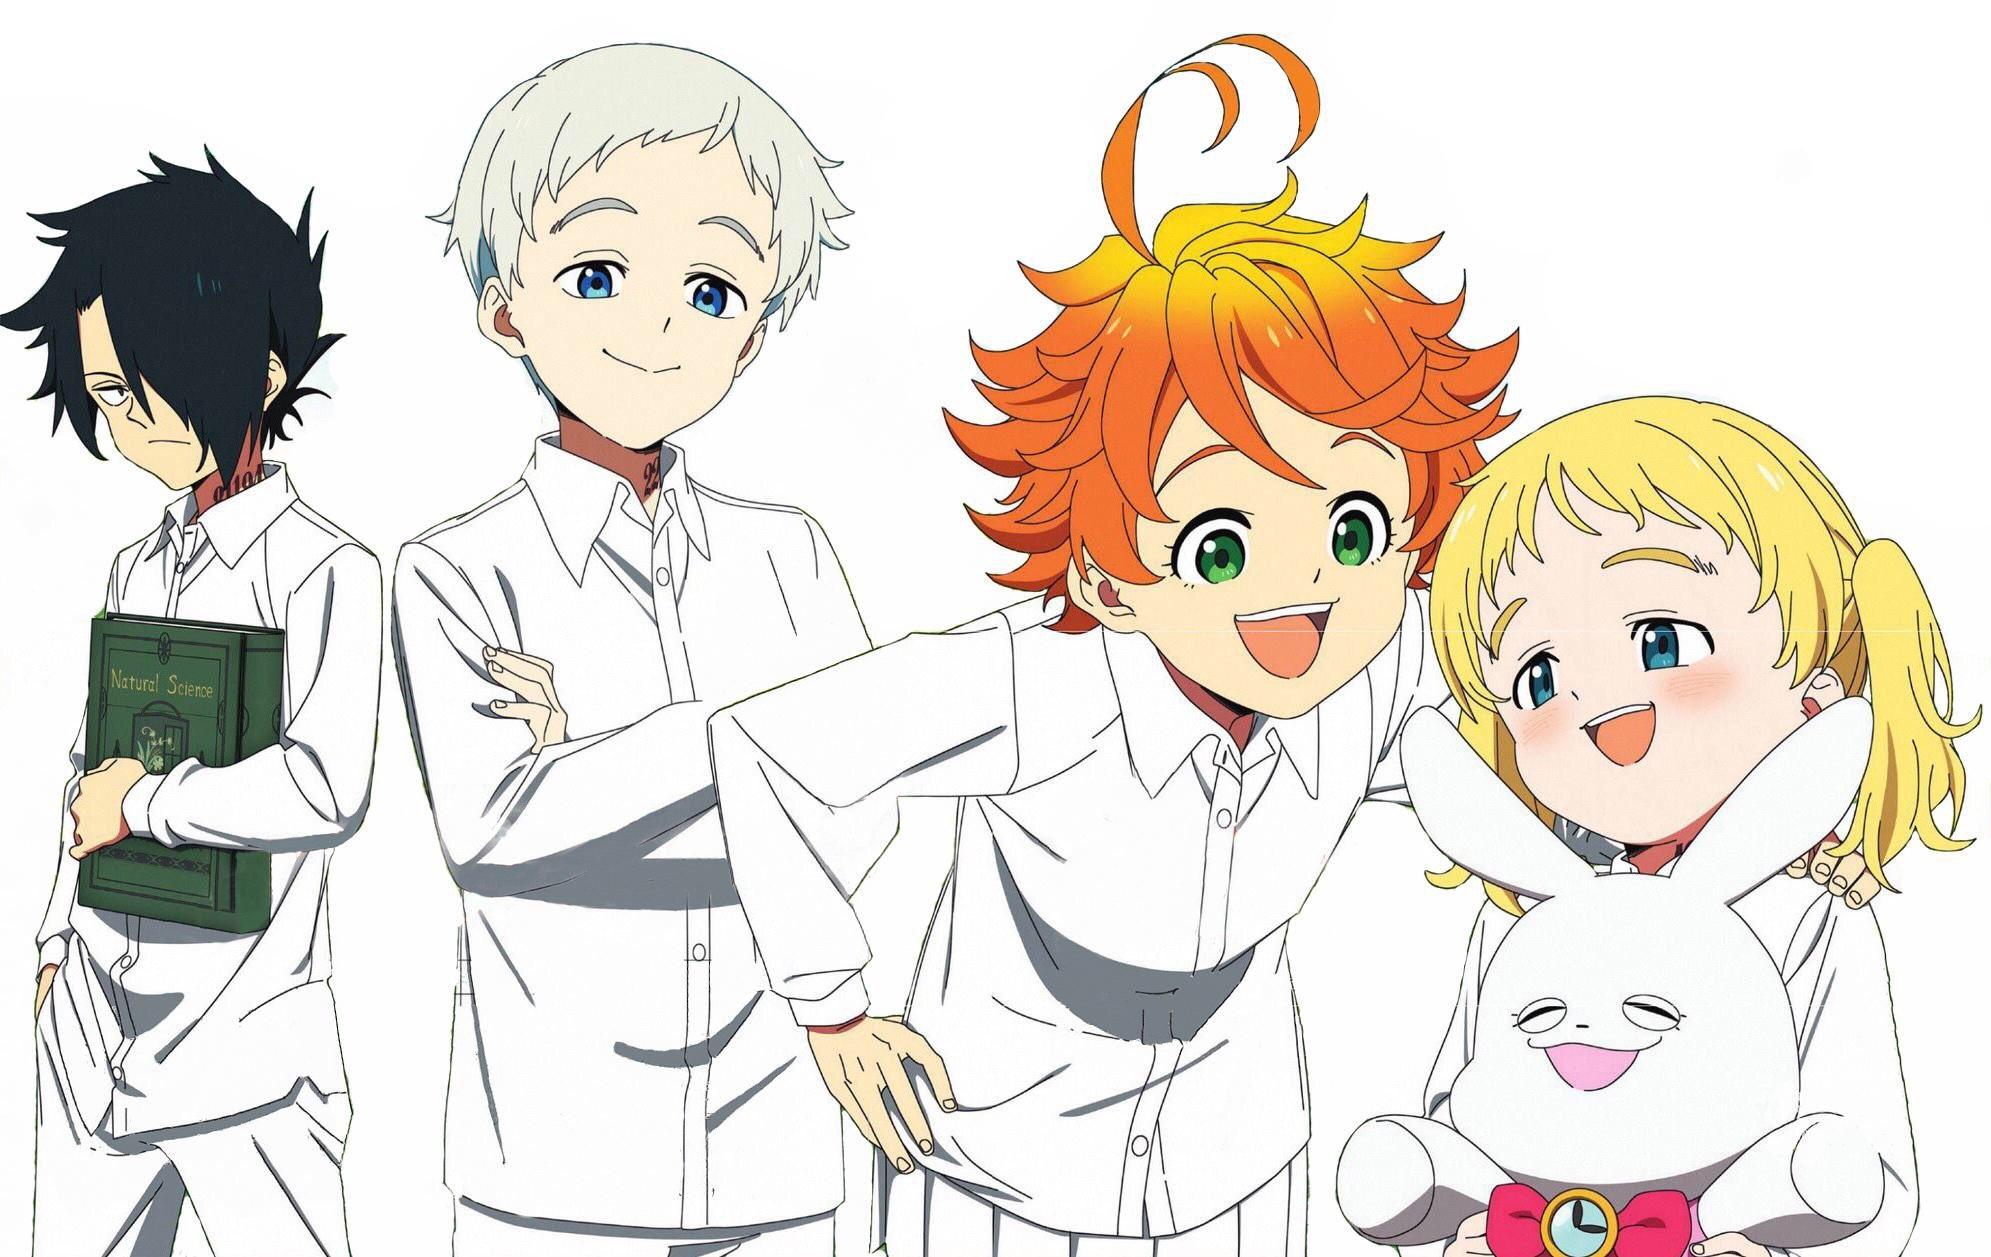 emma, ray and norman from the promised neverland wallpaper on emma ray norman wallpapers